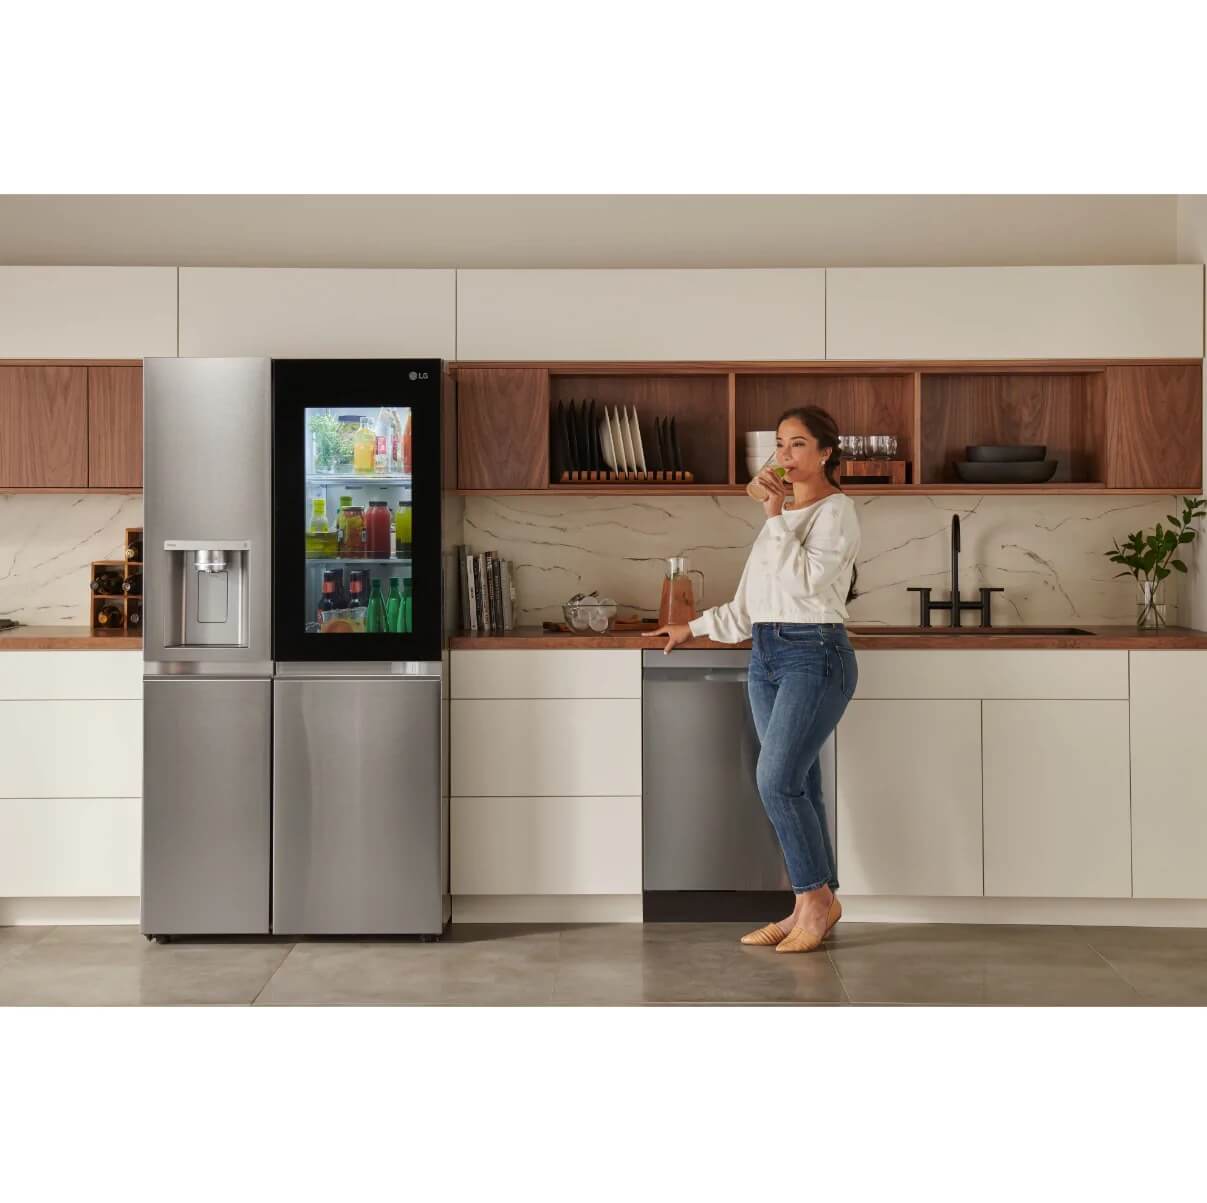  LG Appliances Refrigeration 36 Inch Side-by-Side Counter-Depth InstaView Refrigerator with Craft Ice in Stainless Steel 23 Cu. Ft. (LRSOC2306S)